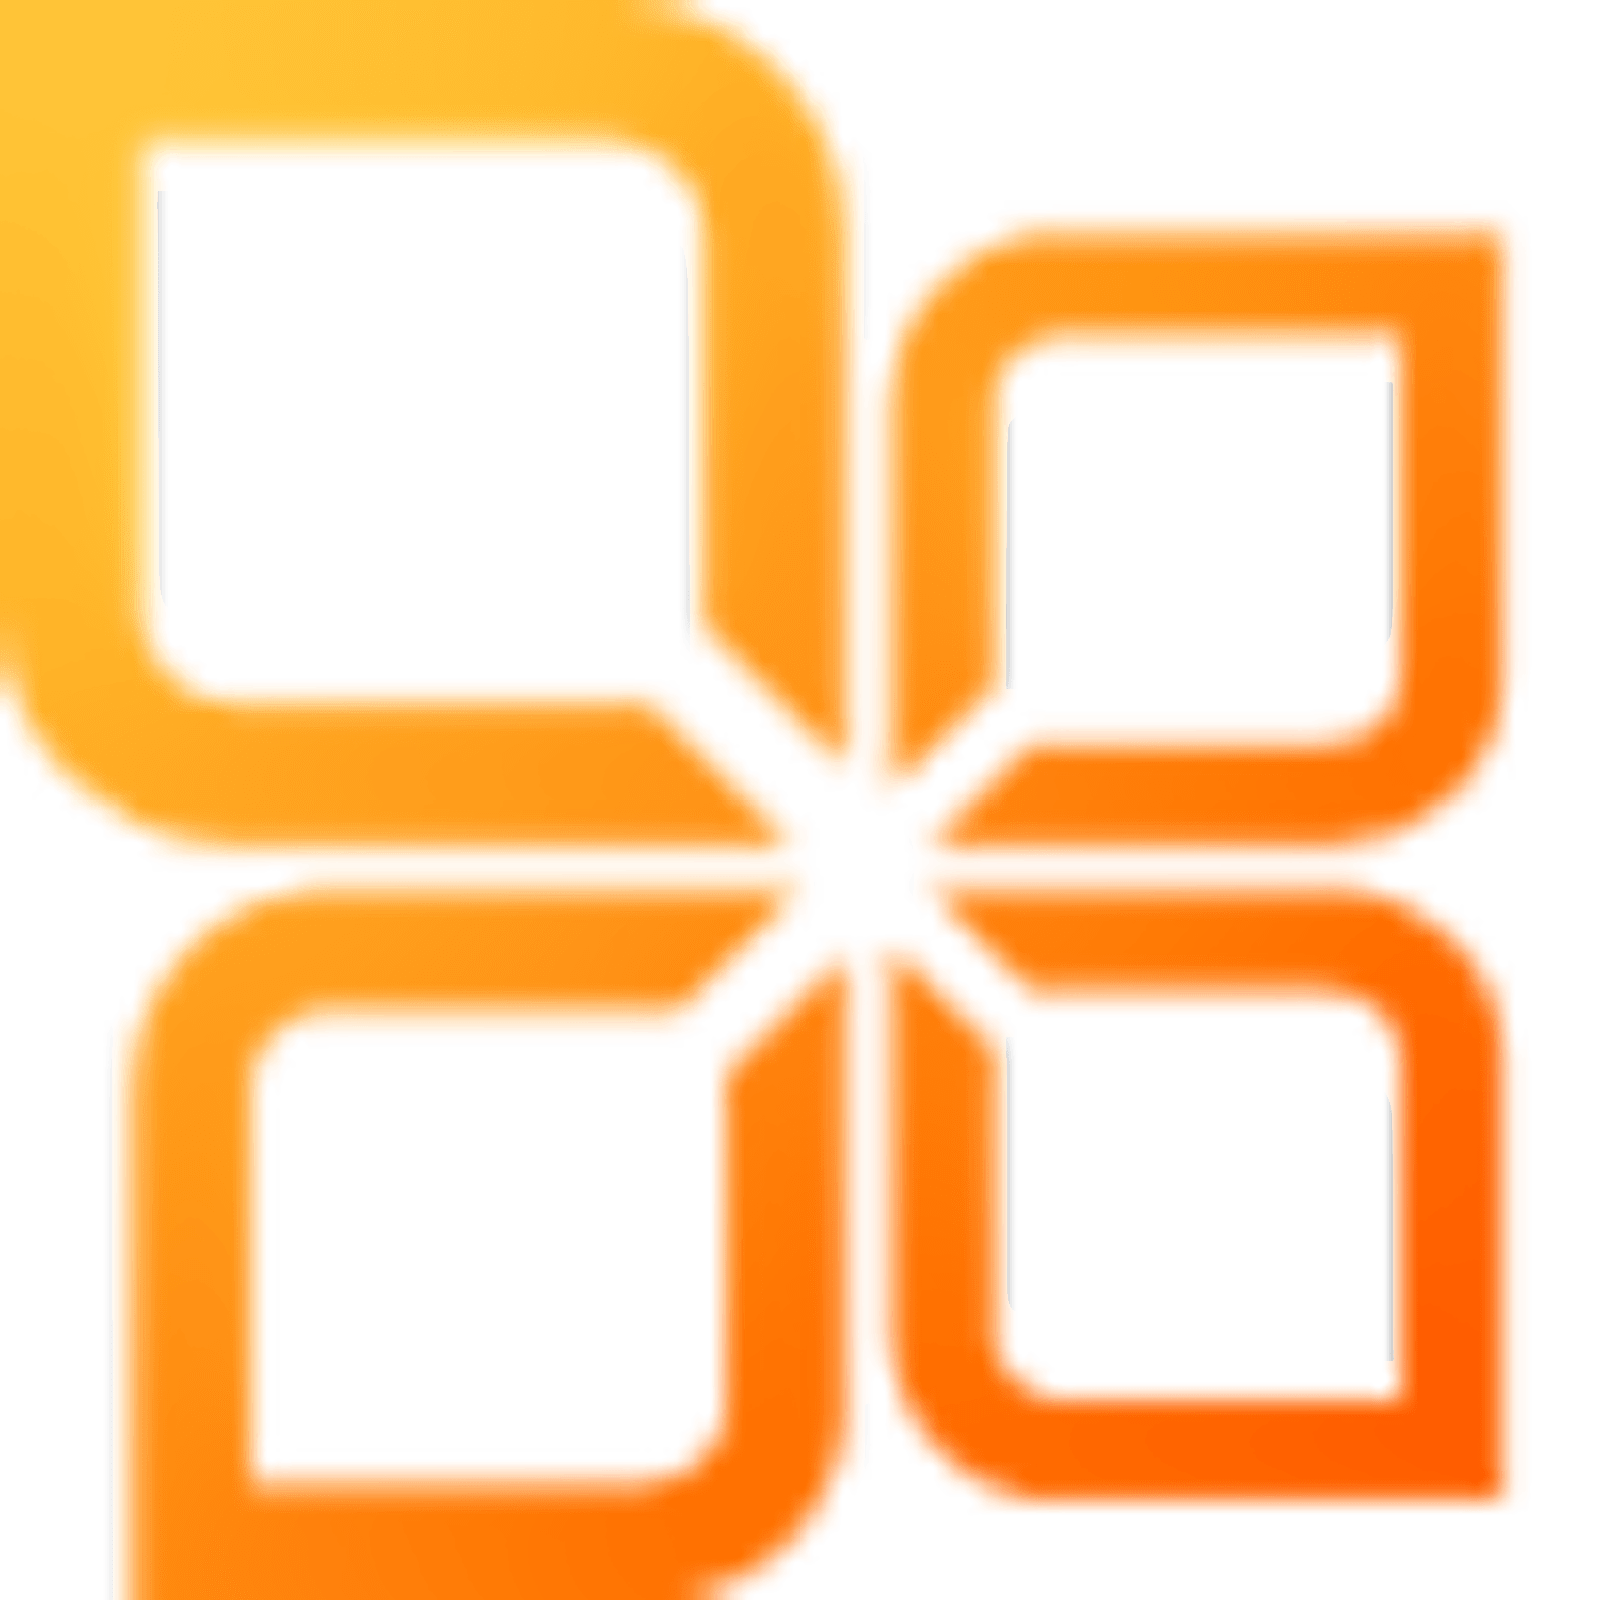 Download Service Pack 1 for Microsoft Office 2010 Install Latest App downloader